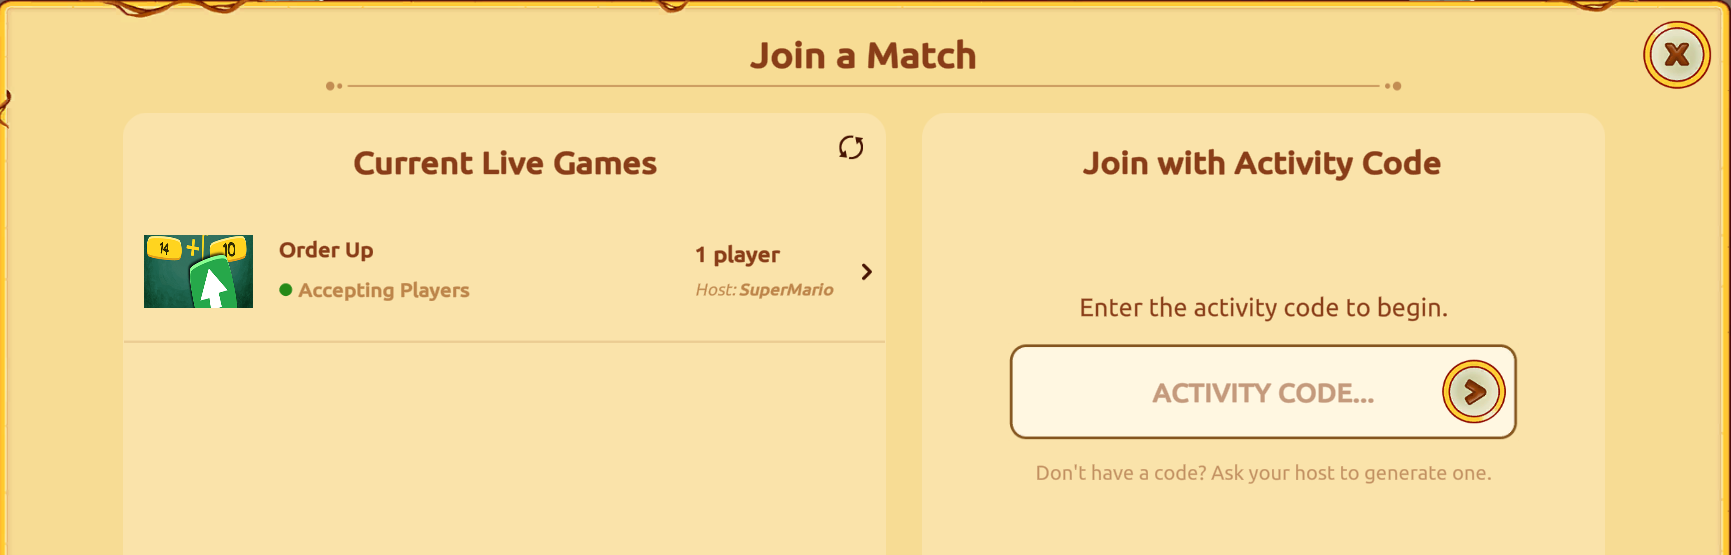 join a match.png